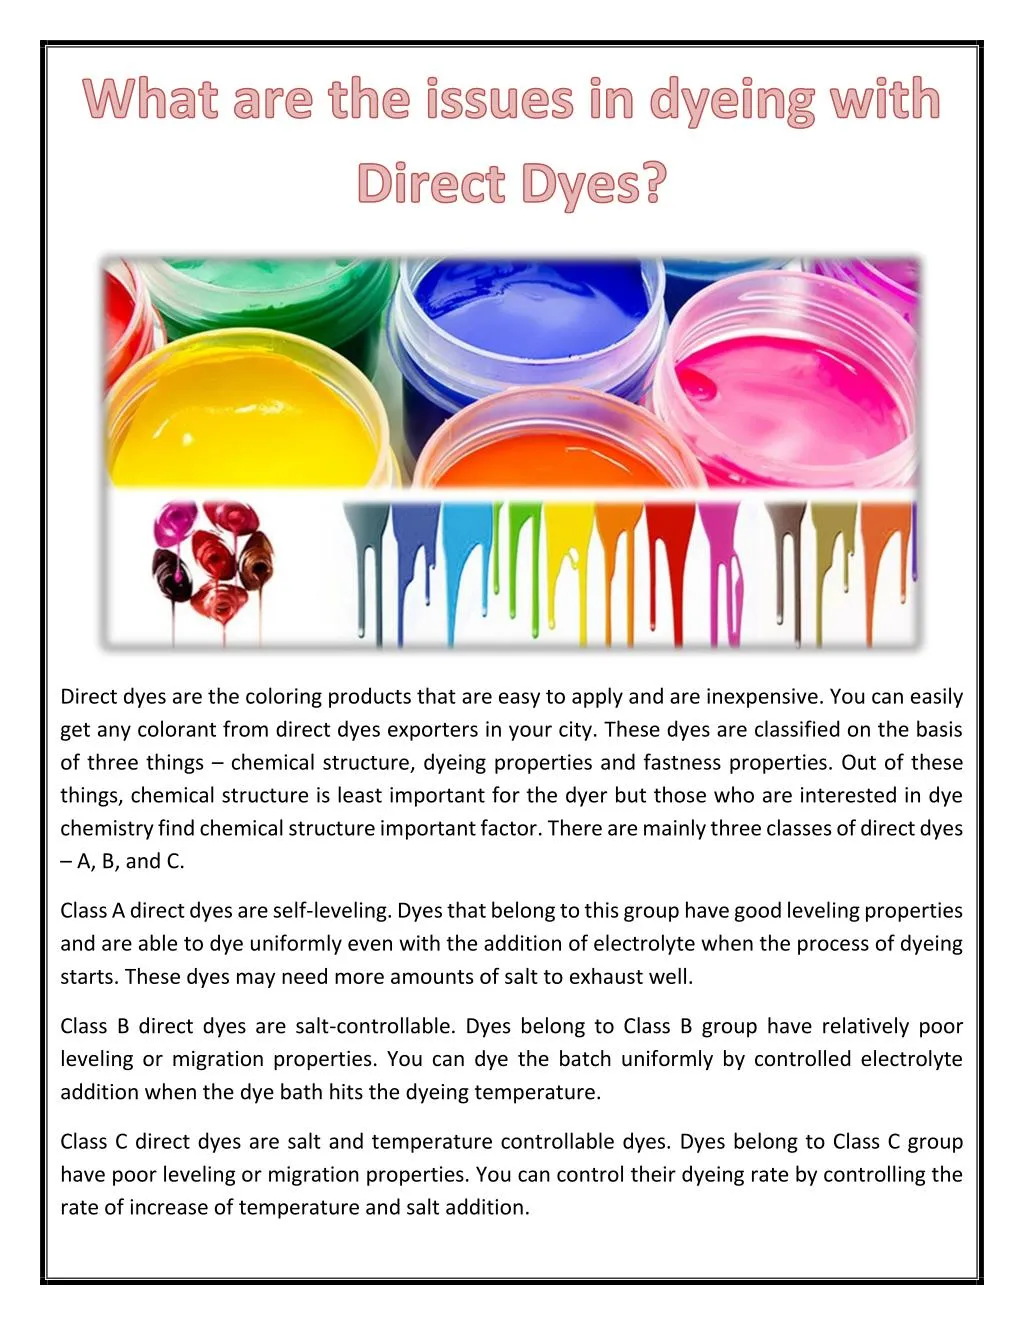 direct dyes are the coloring products that